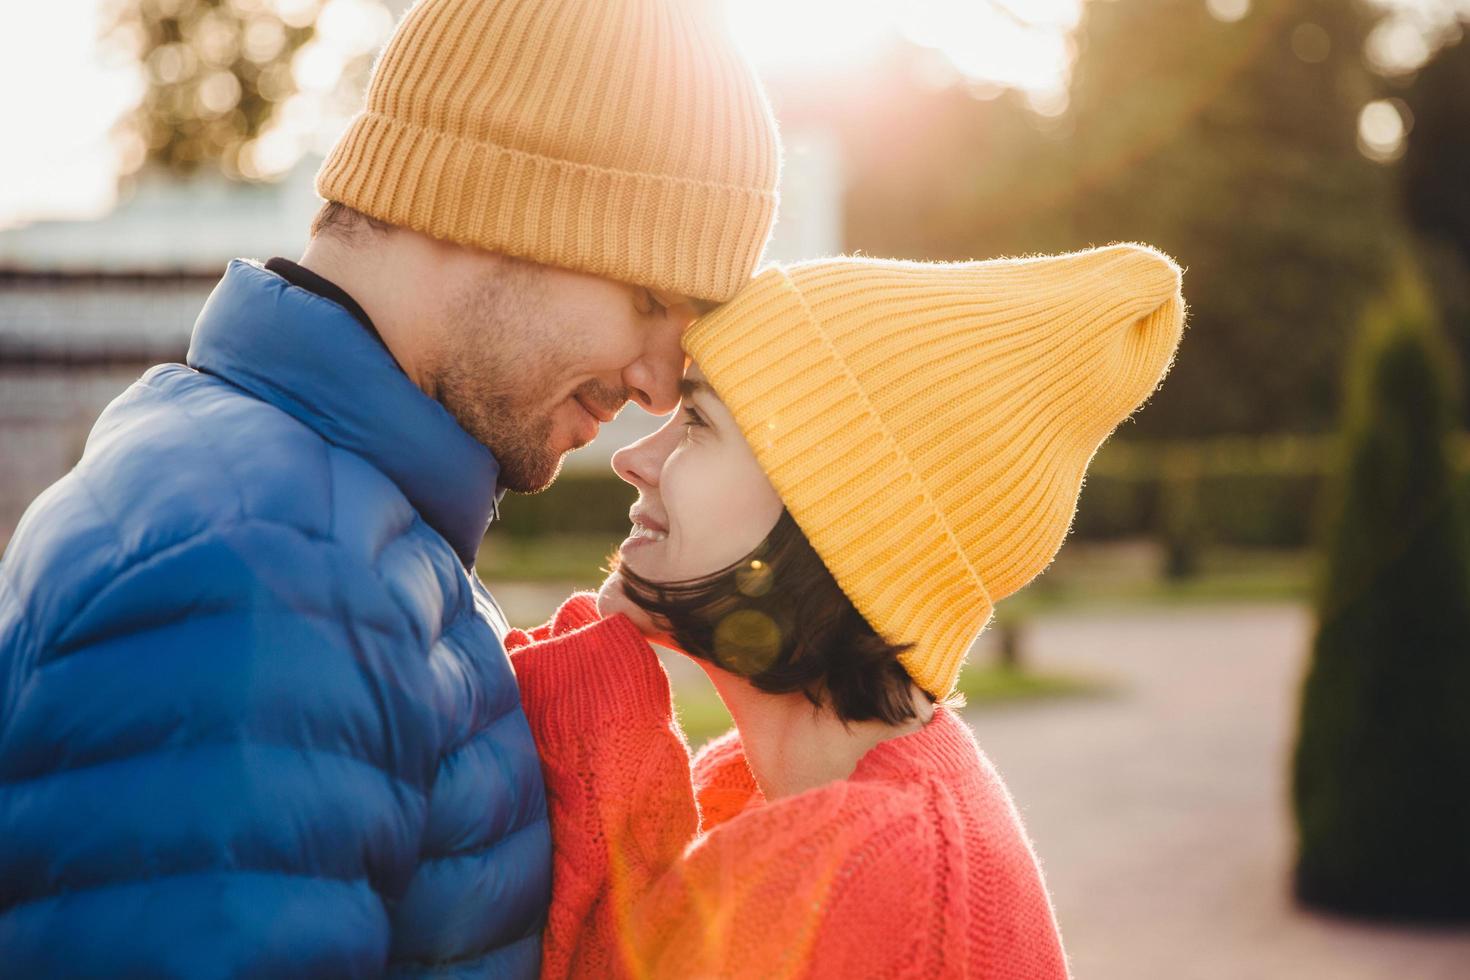 Romantic young couple look at each other with great love, have nice relationship, going to kiss, have walk outdoor in park, wear warm clothes. Lovely couple with eyes full of love and smile. photo